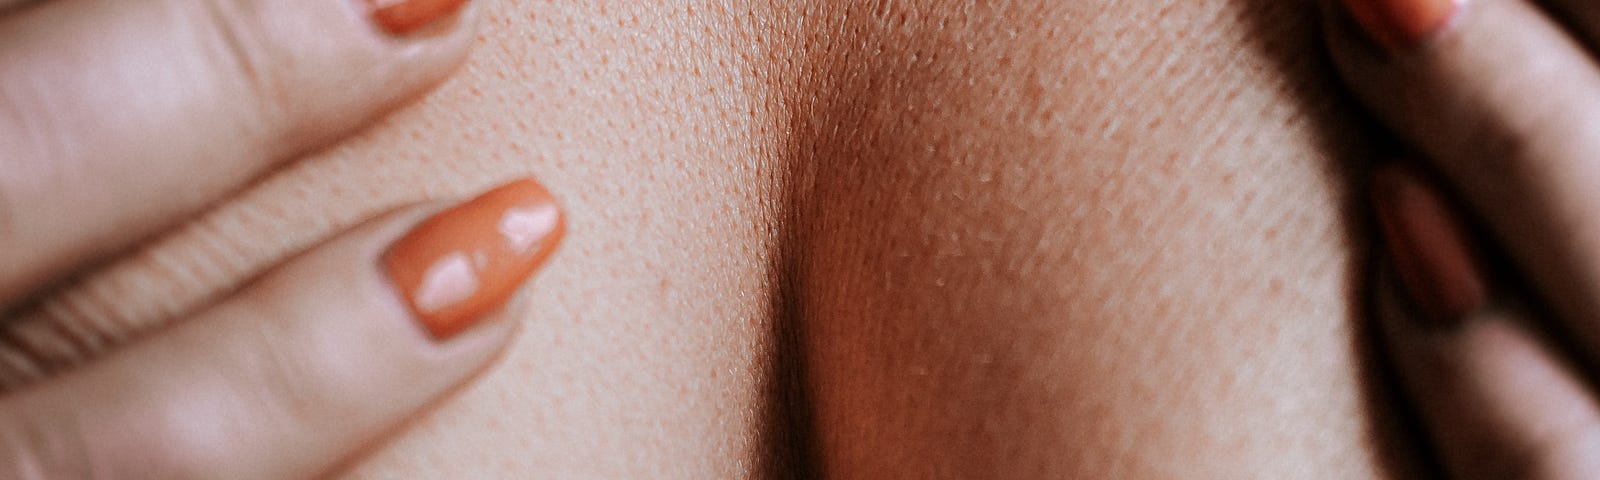 Are Saggy Boobs a Turn Off for Men?, by MonalisaSmiled, Breast Stories